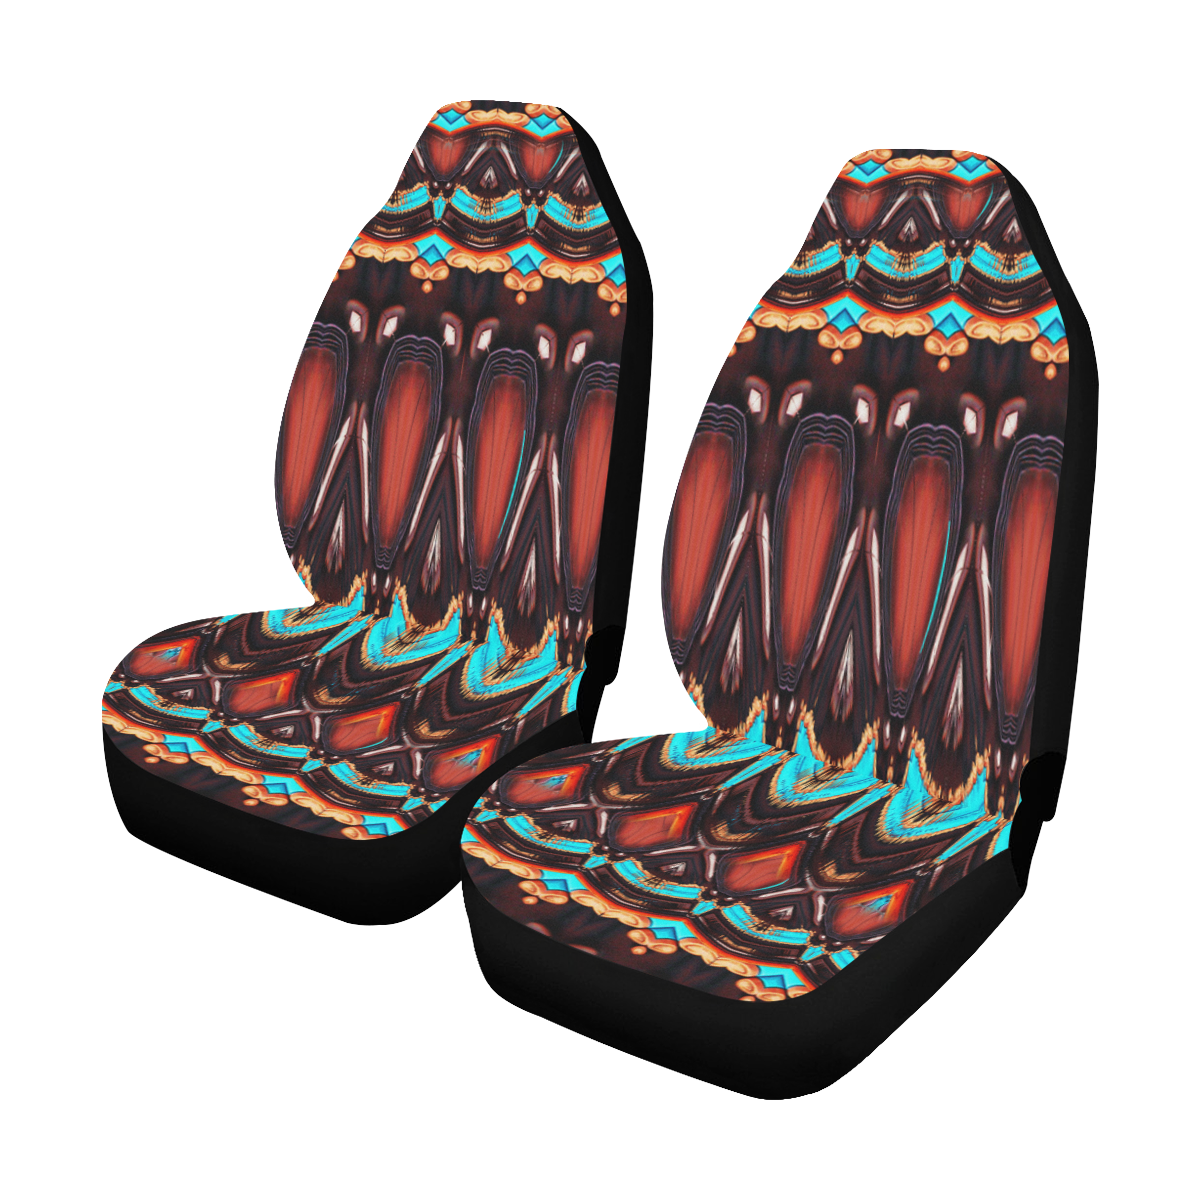 K172 Wood and Turquoise Abstract Car Seat Covers (Set of 2)